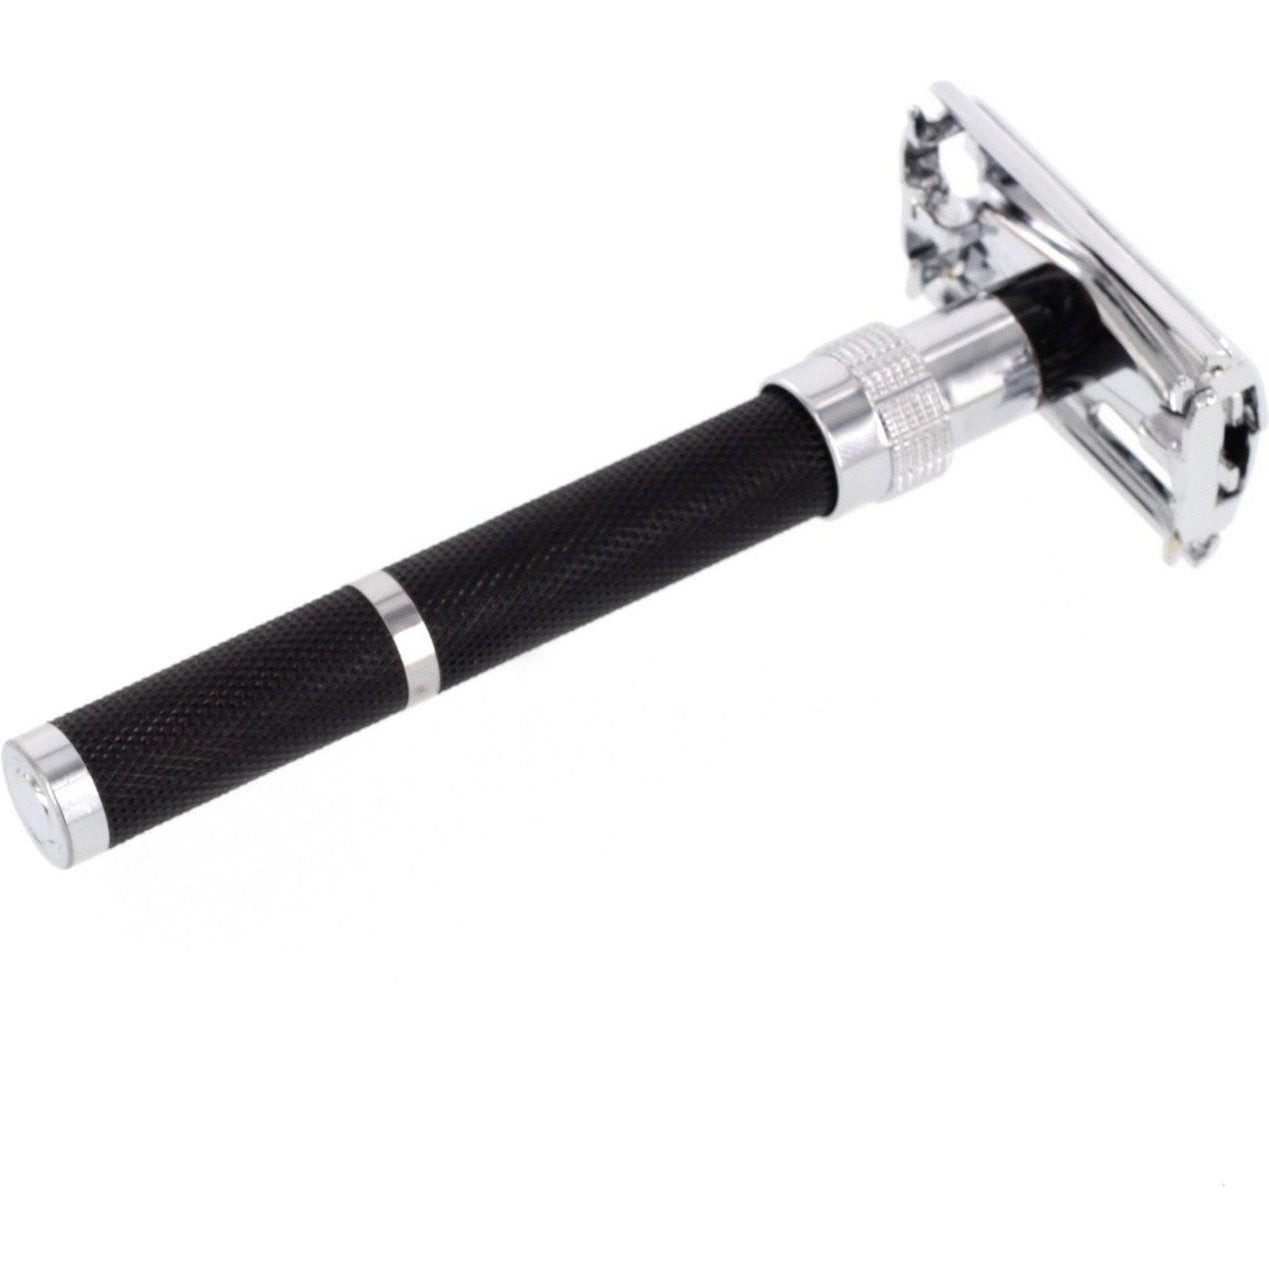 Product image 4 for Parker 96R Double Edge Safety Razor